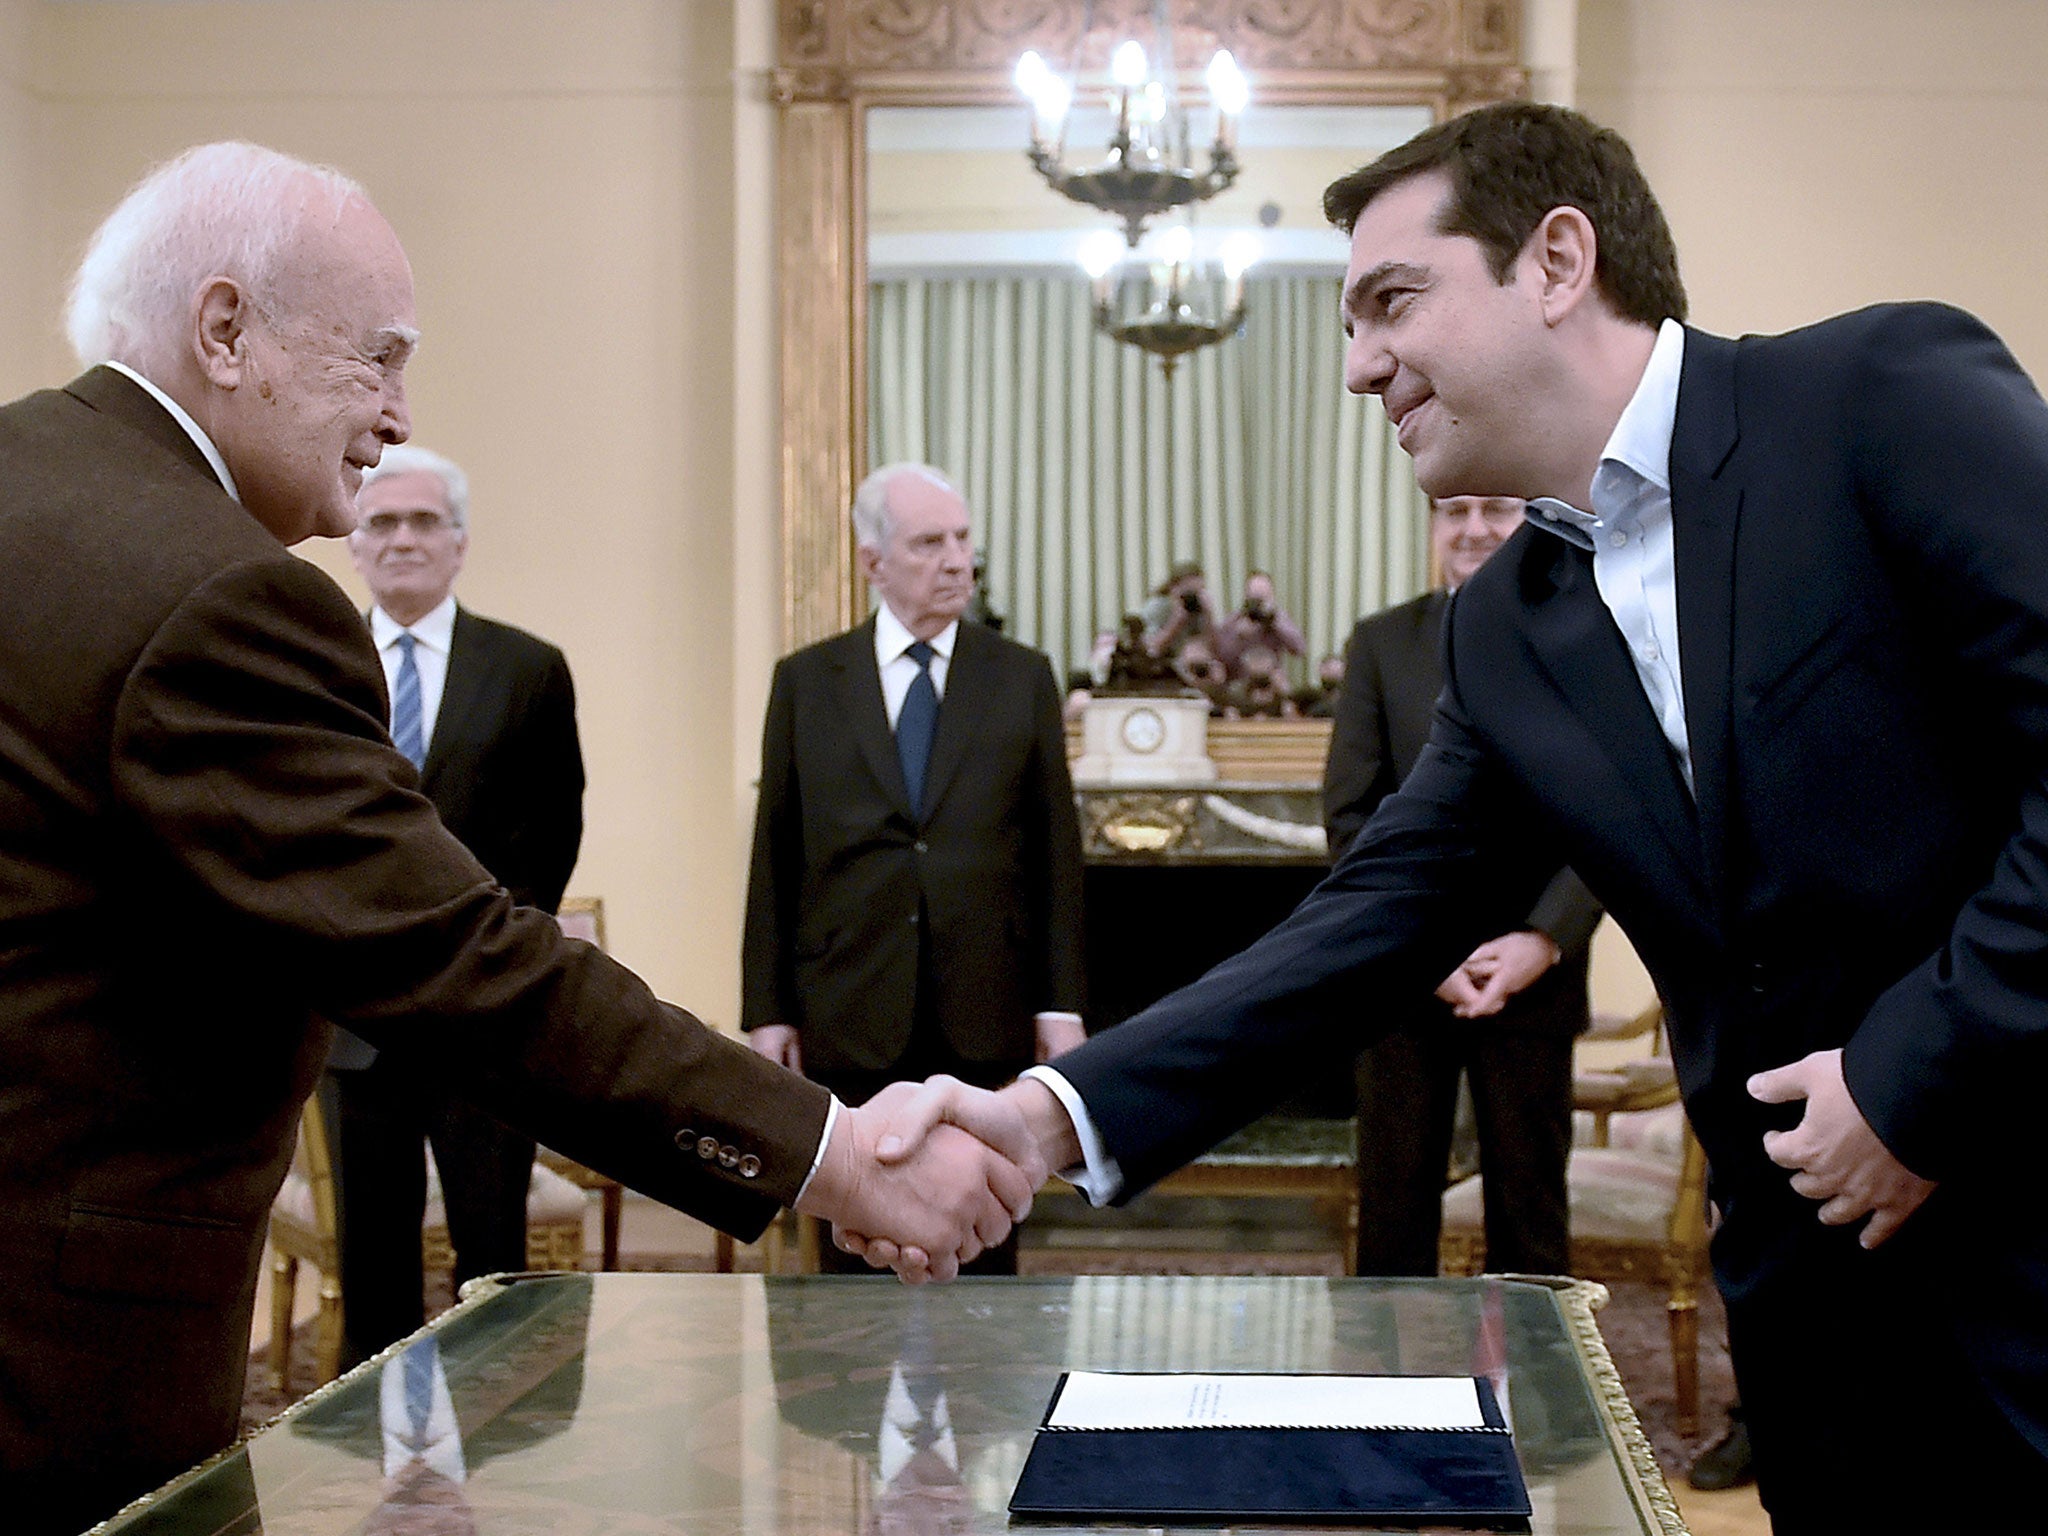 Syriza's leader Alexis Tsipras (R) shakes hands with Greece's President Karolos Papoulias (L) as he is sworn in as Greek Prime Minister at the Presidential Palace in Athens